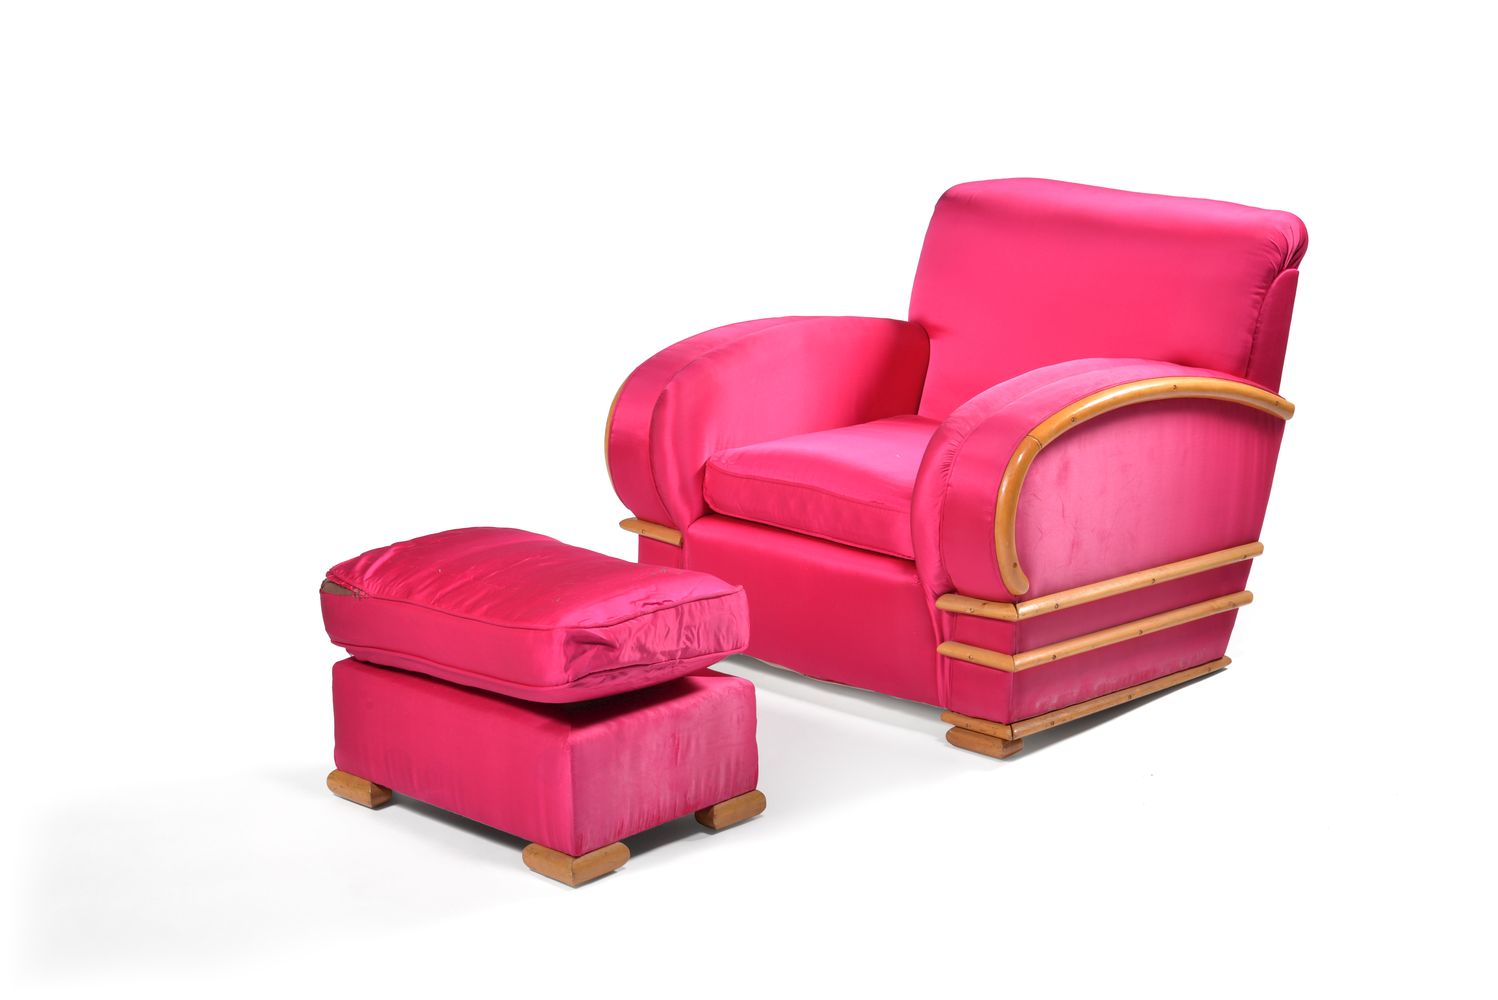 An Art Deco lounge armchair and matching footstool